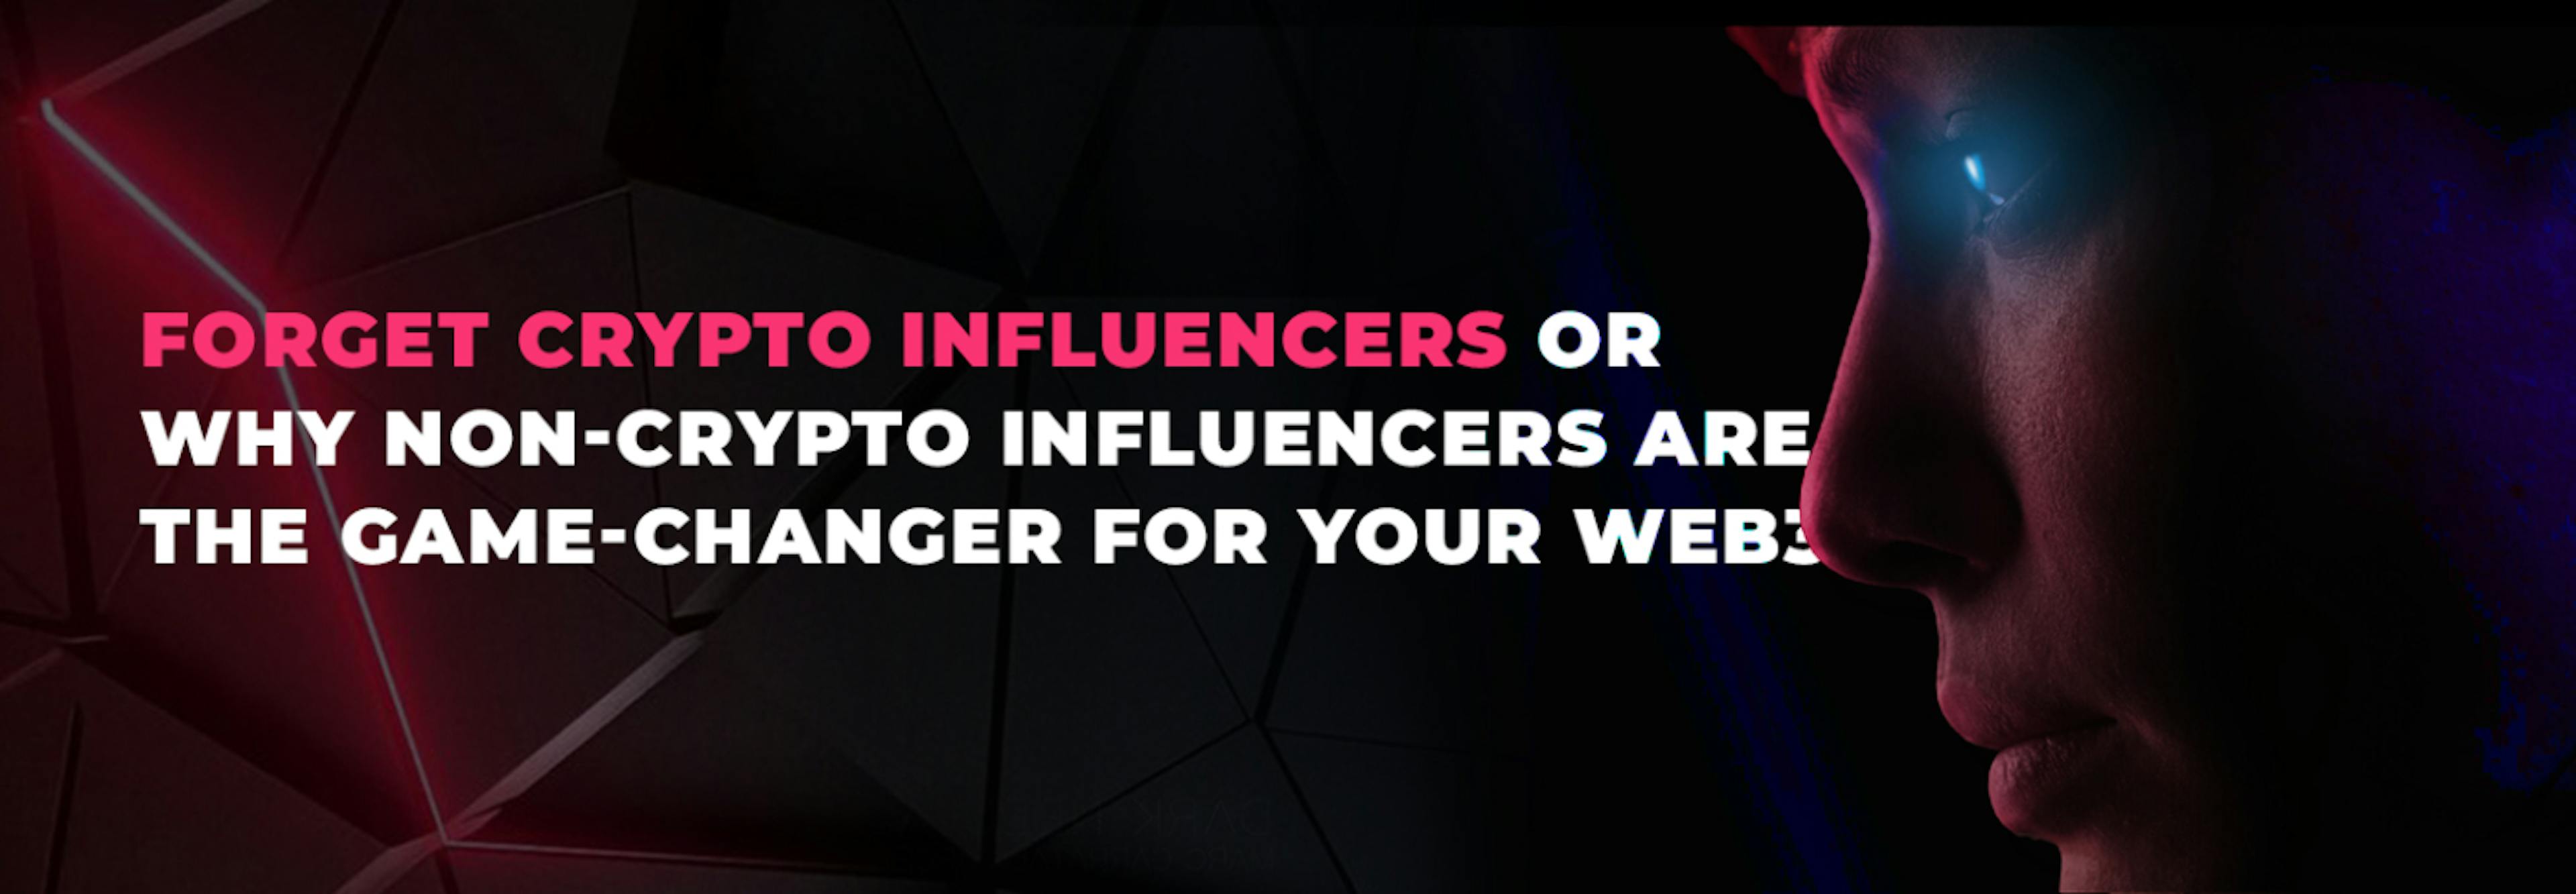 featured image - Your Crypto Project Might Benefit More from Non-Crypto Influencers Than You Think